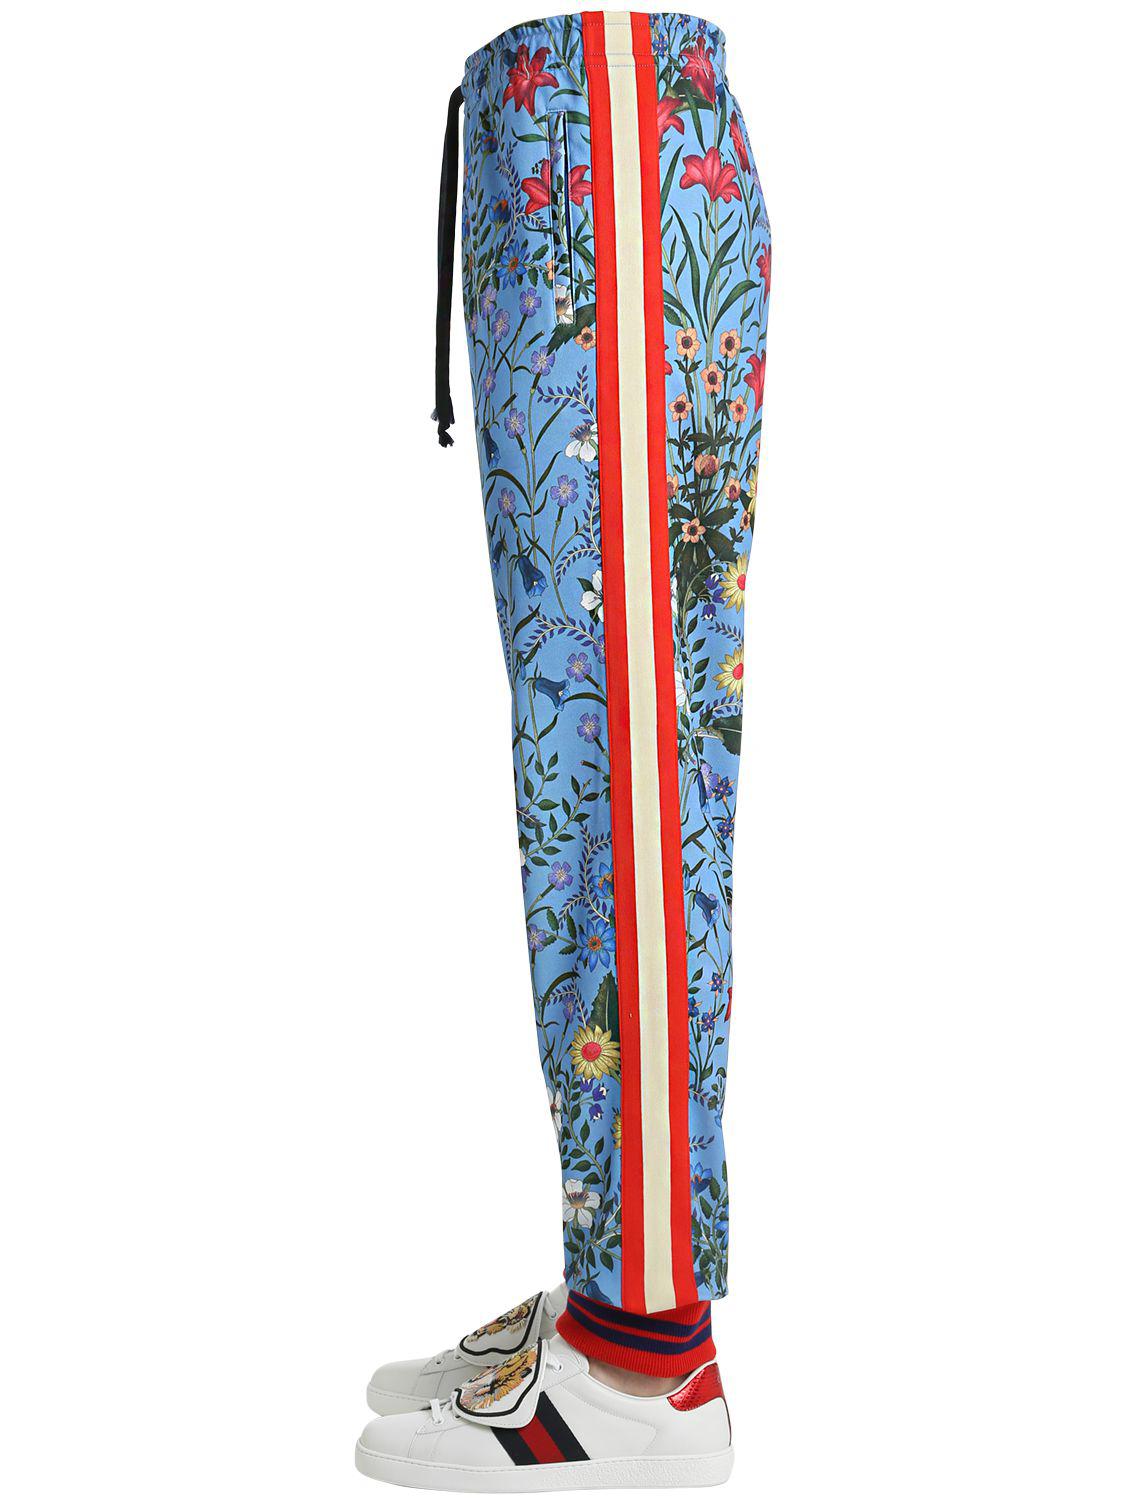 Gucci New Flora Print Jersey Track Pants in Turquoise (Blue) - Lyst